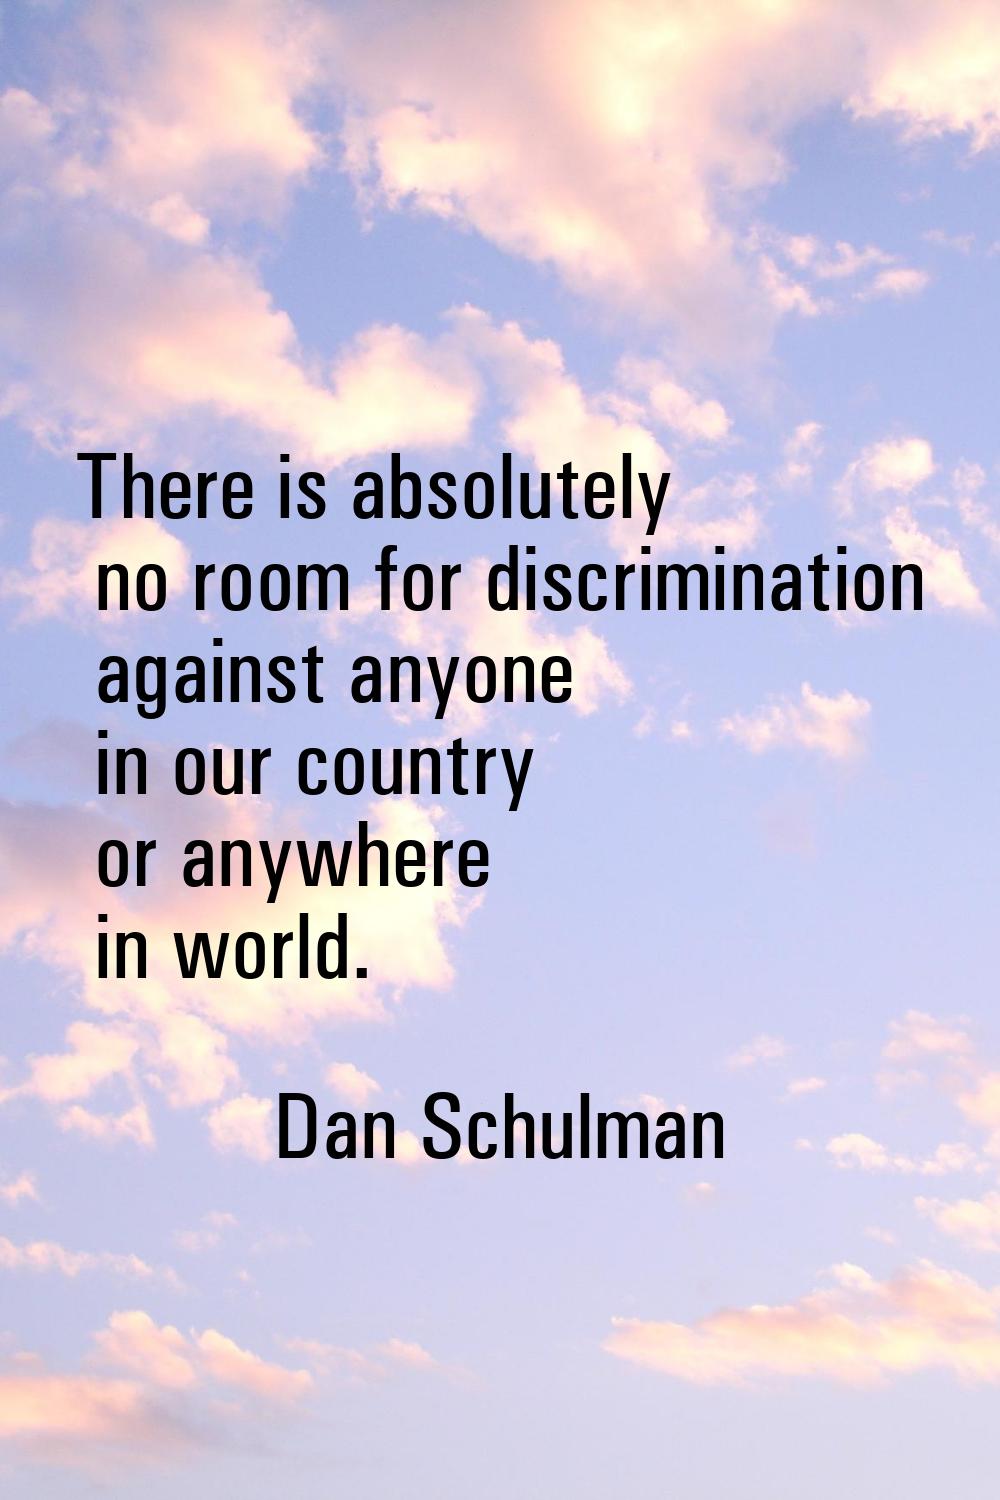 There is absolutely no room for discrimination against anyone in our country or anywhere in world.